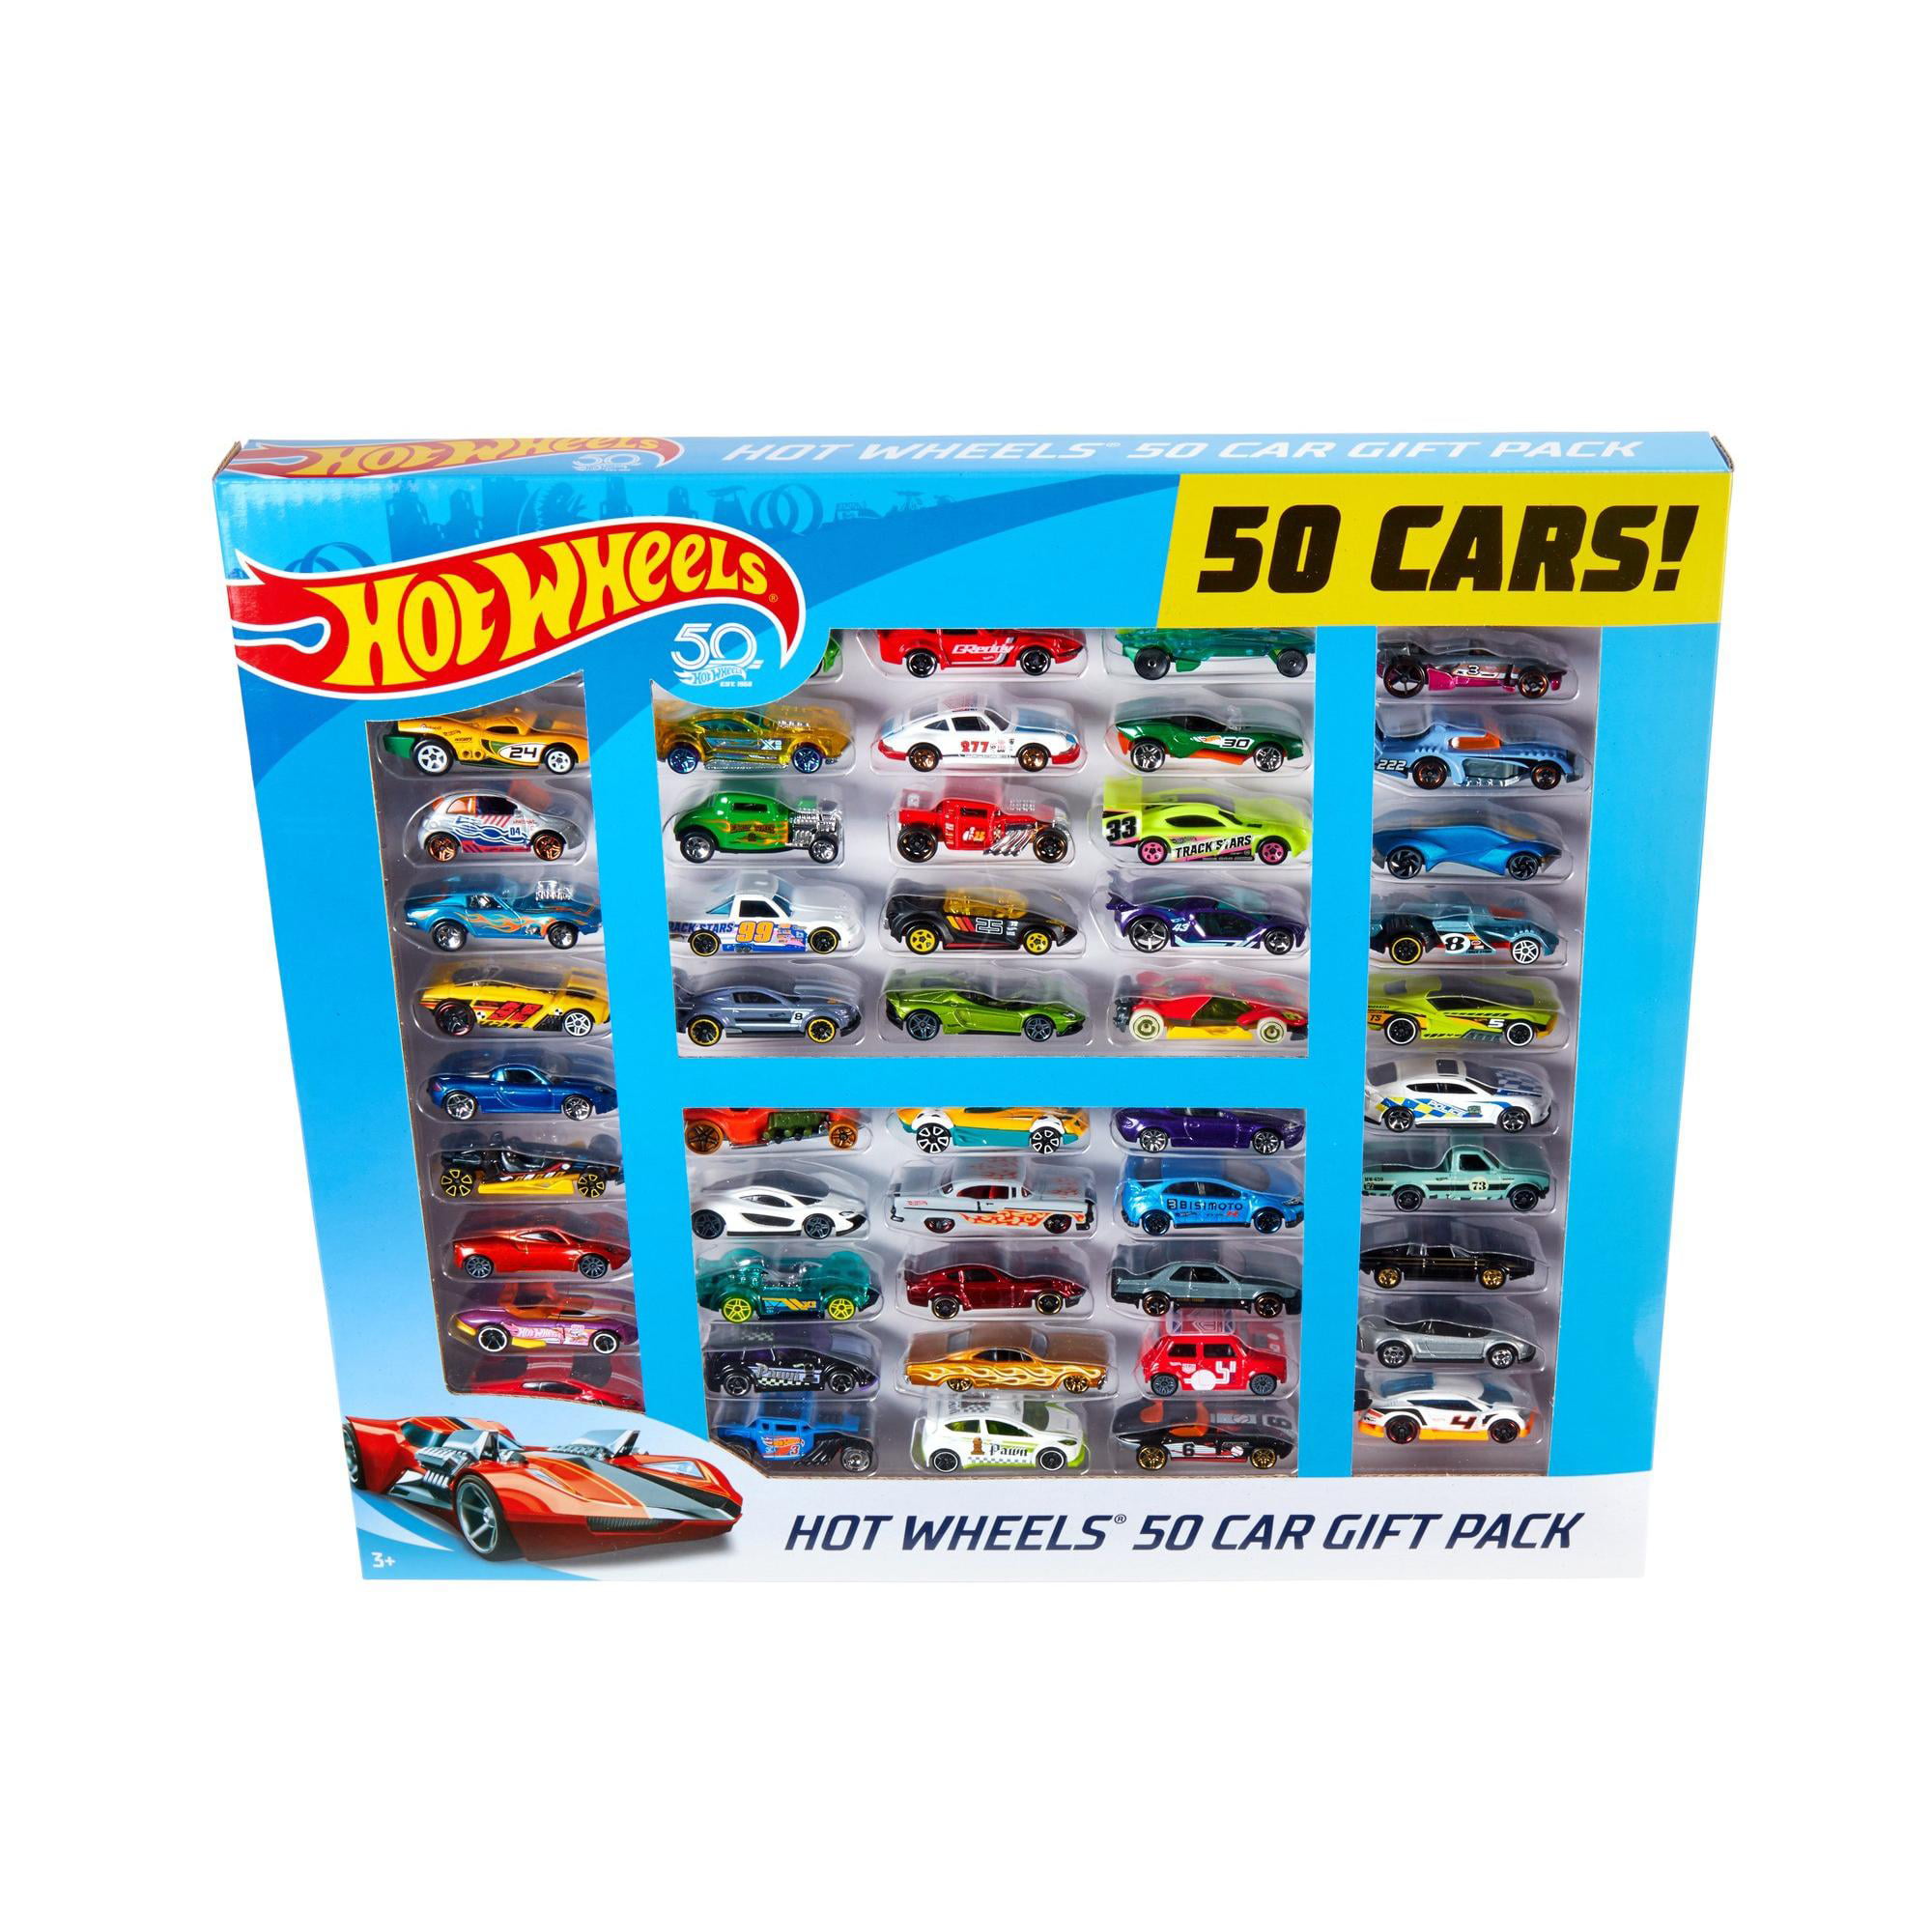 ALL CARS ARE NEW Job Lot Bundle of Brand New Cars 5 x HOT WHEELS Cars 